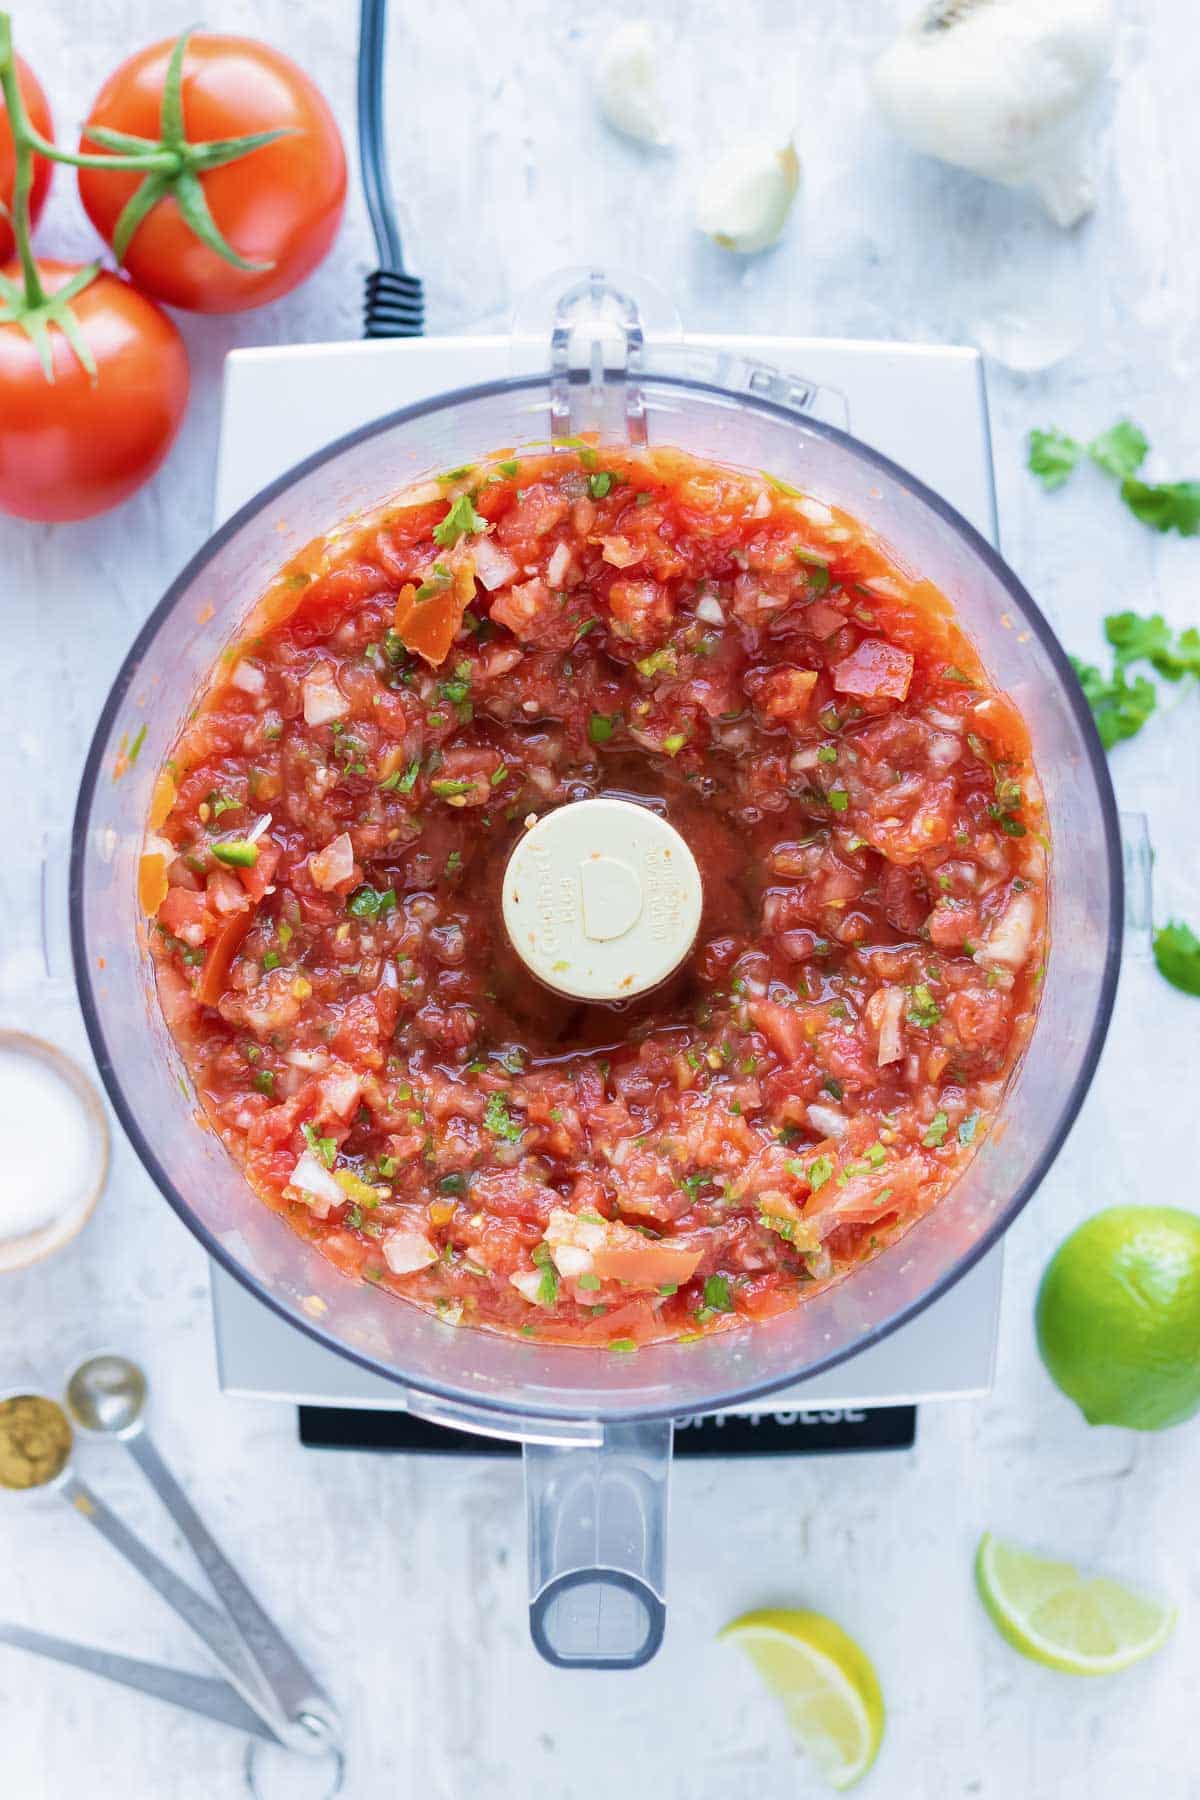 The salsa is processed until the desired consistency is reached.